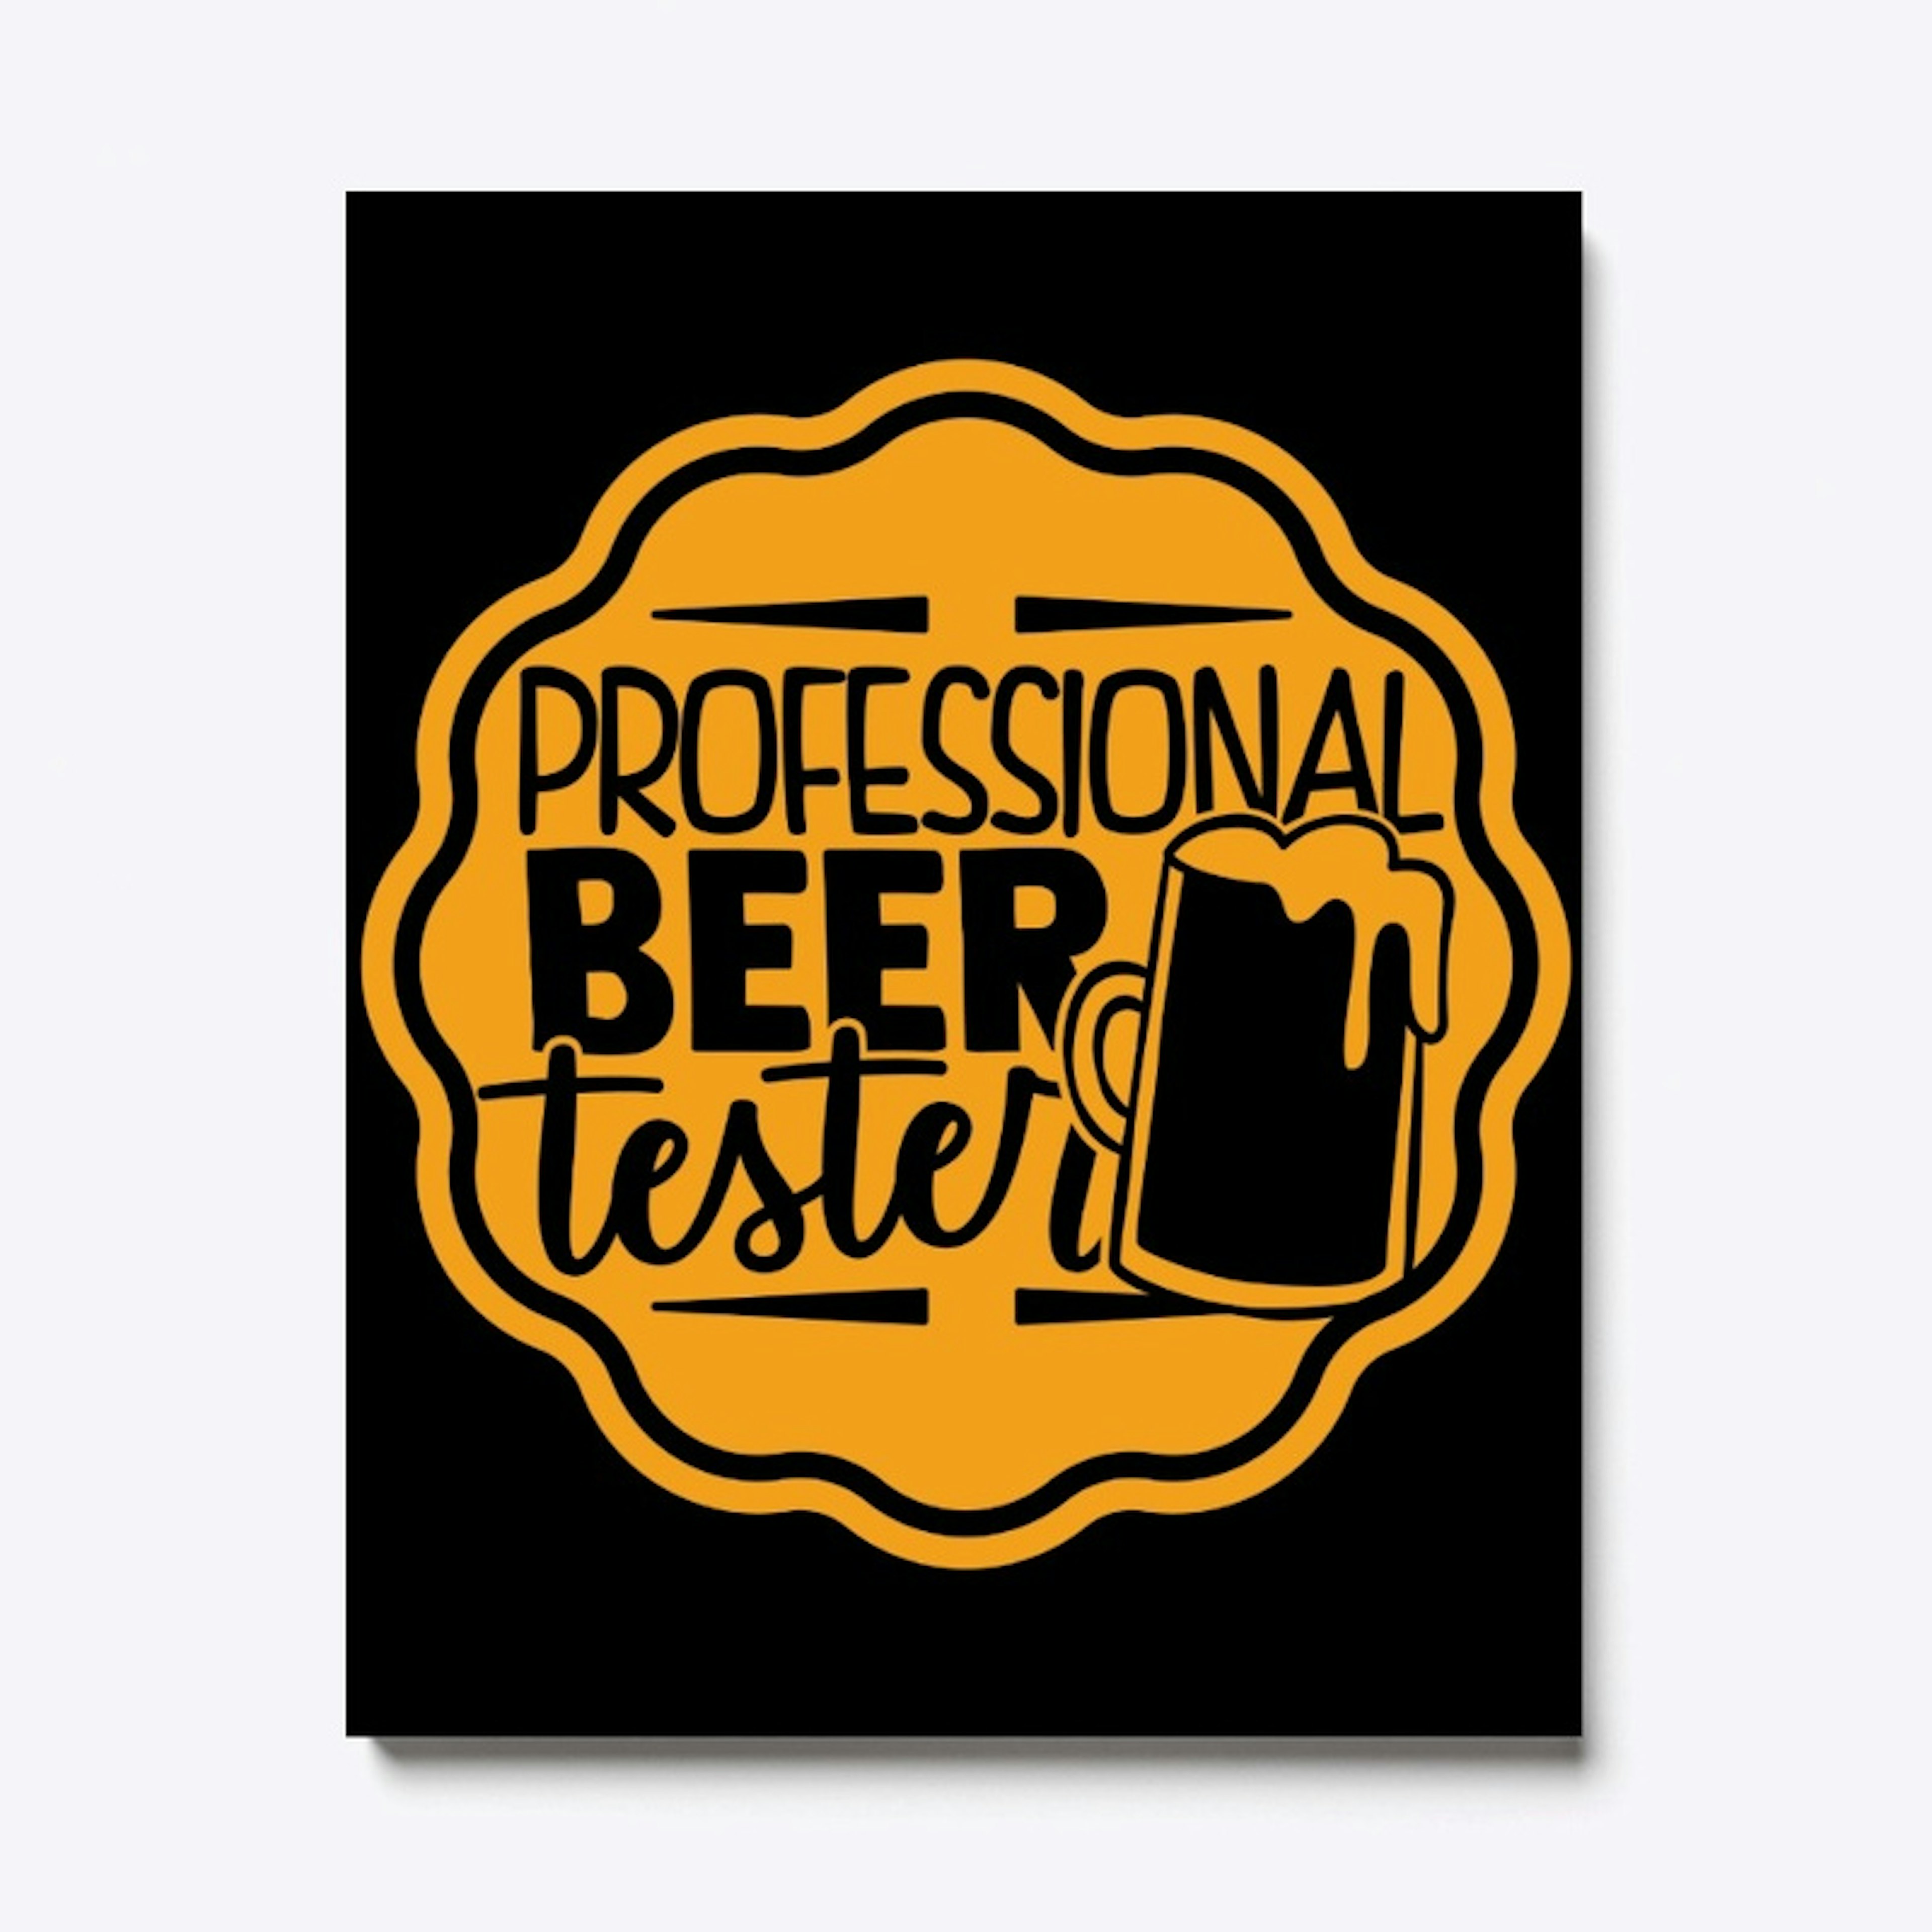 Professional Beer Tester